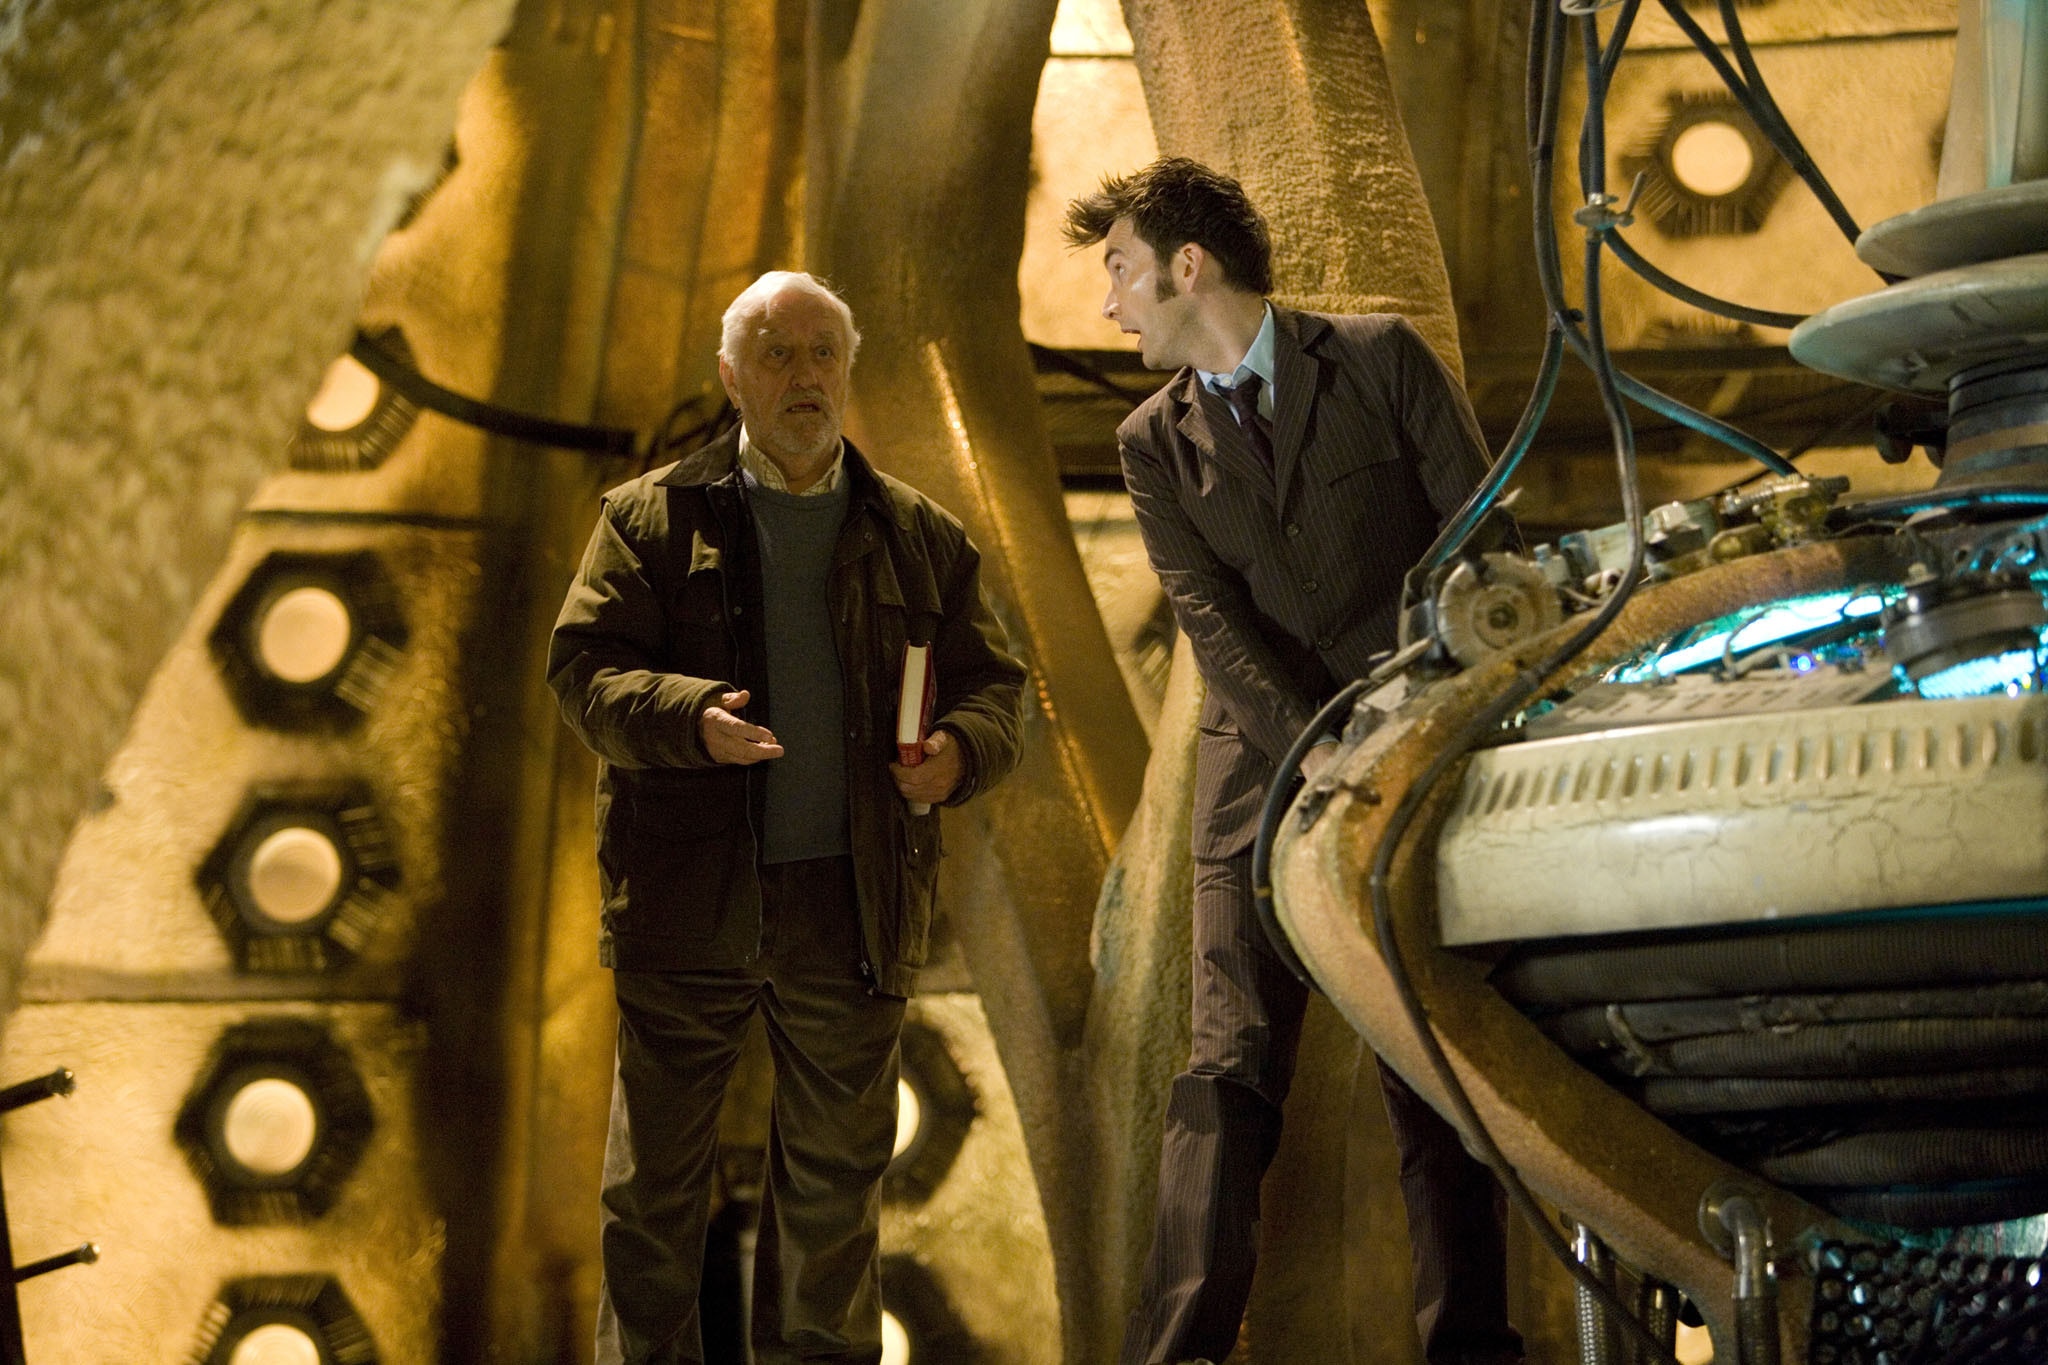 A still from 'The End of Time: Part 2' featuring David Tennant as the Doctor and Bernard Cribbins as Wilfred Mott. The Doctor and Wilf are standing in the TARDIS console room.